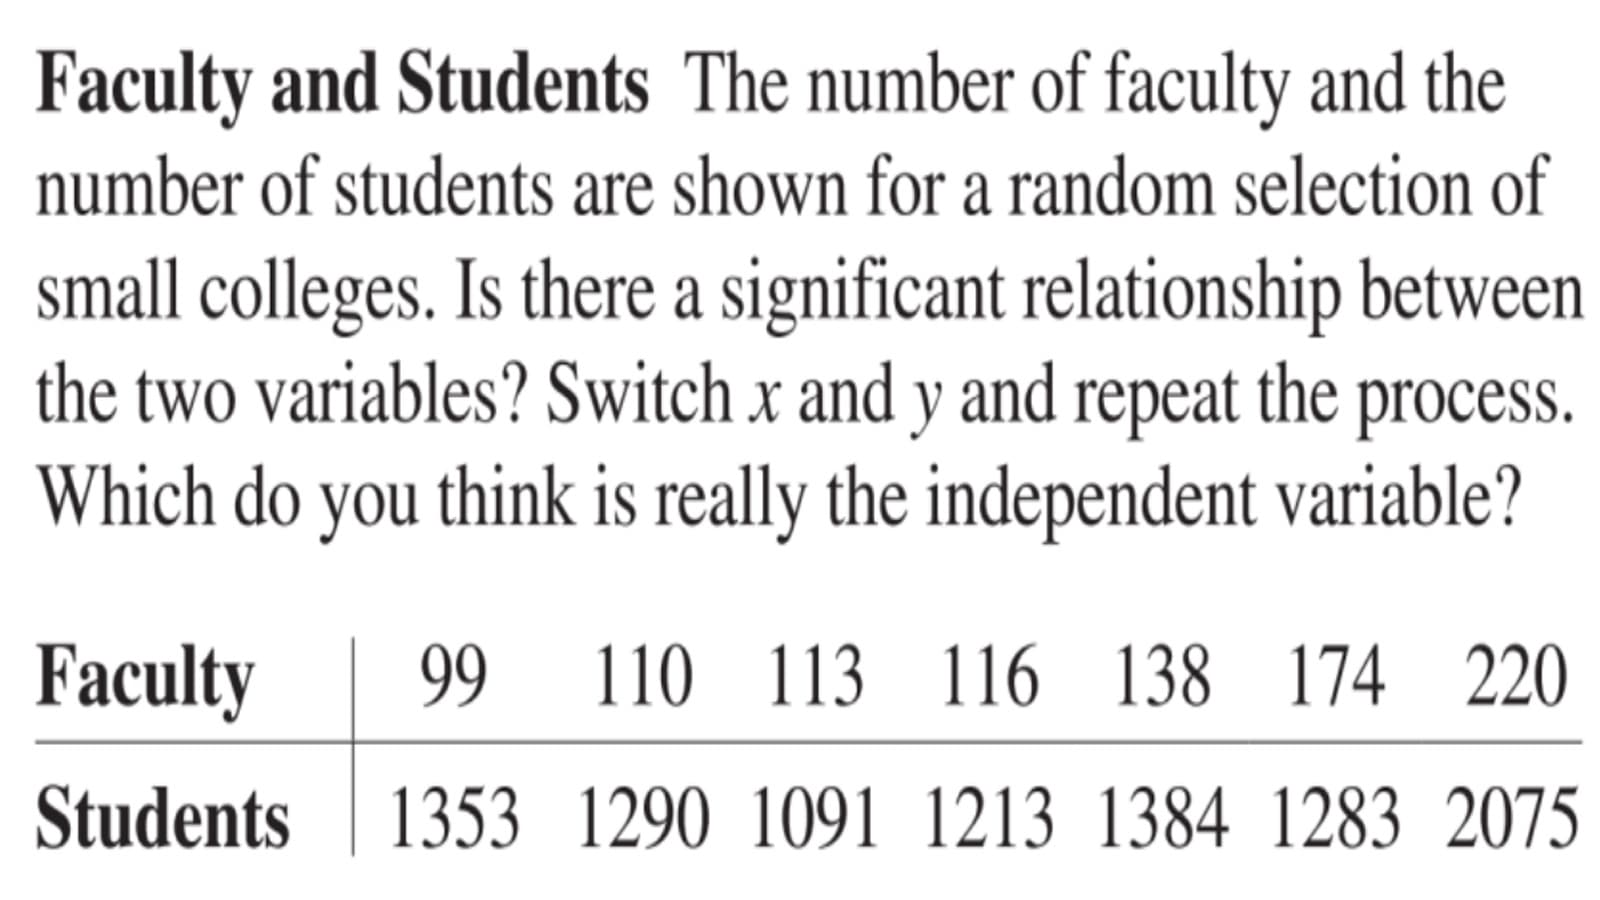 Faculty and Students The number of faculty and the
number of students are shown for a random selection of
small colleges. Is there a significant relationship between
the two variables? Switch x and y and repeat the process.
Which do you think is really the independent variable?
Faculty
99
110 113 116 138 174 220
Students
1353 1290 1091 1213 1384 1283 2075
